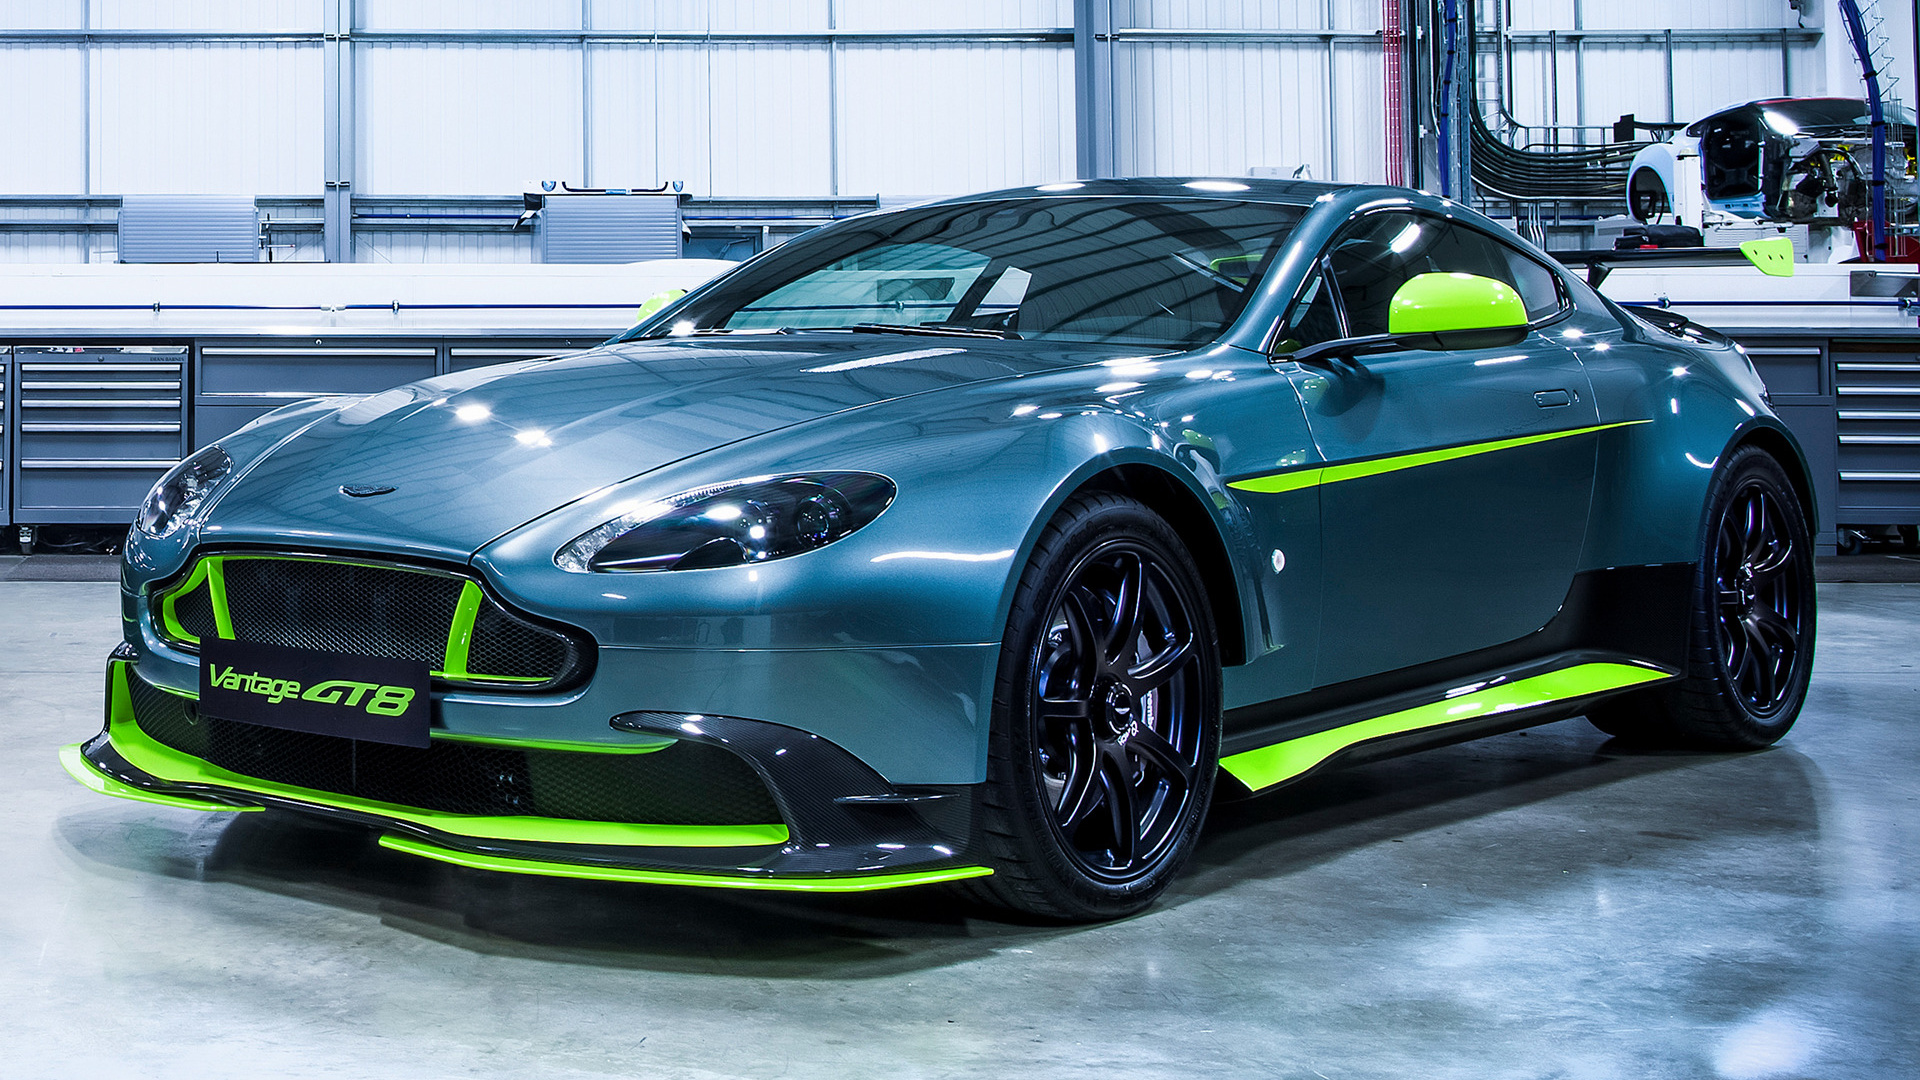 2016 Aston Martin Vantage Gt8 Wallpapers And Hd Images Car Pixel